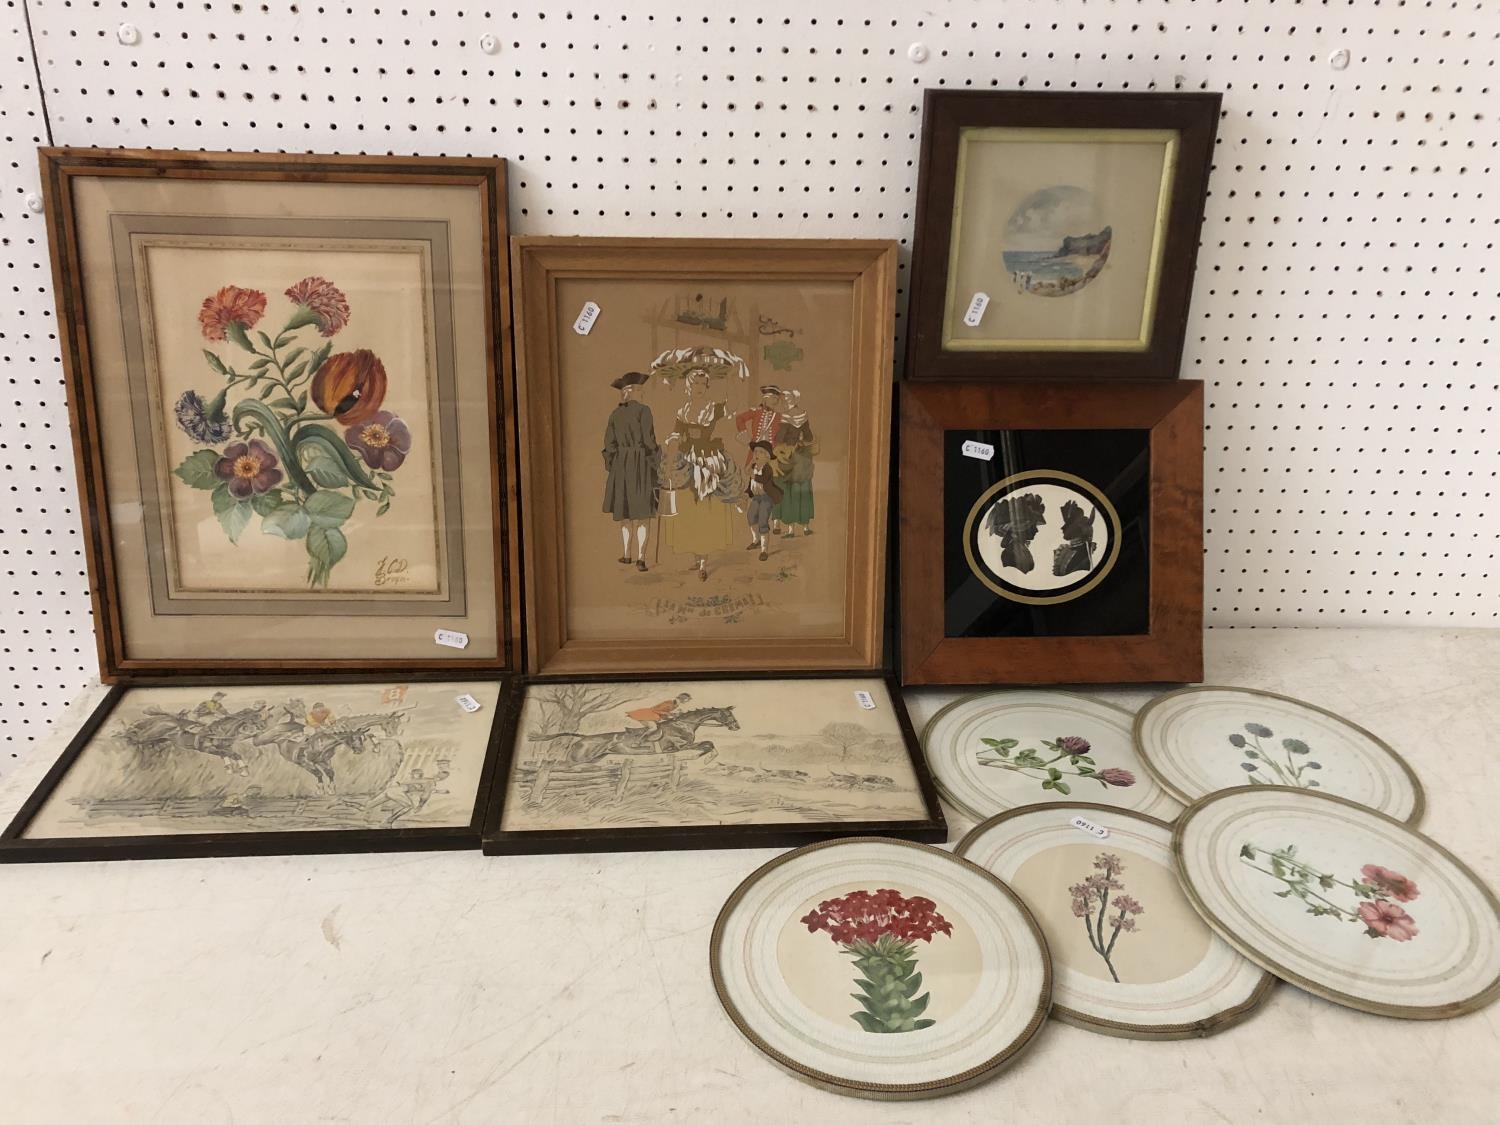 Group of framed works to include: Still life with flowers (19th Century), signed 'J. C. D. Bruyn'